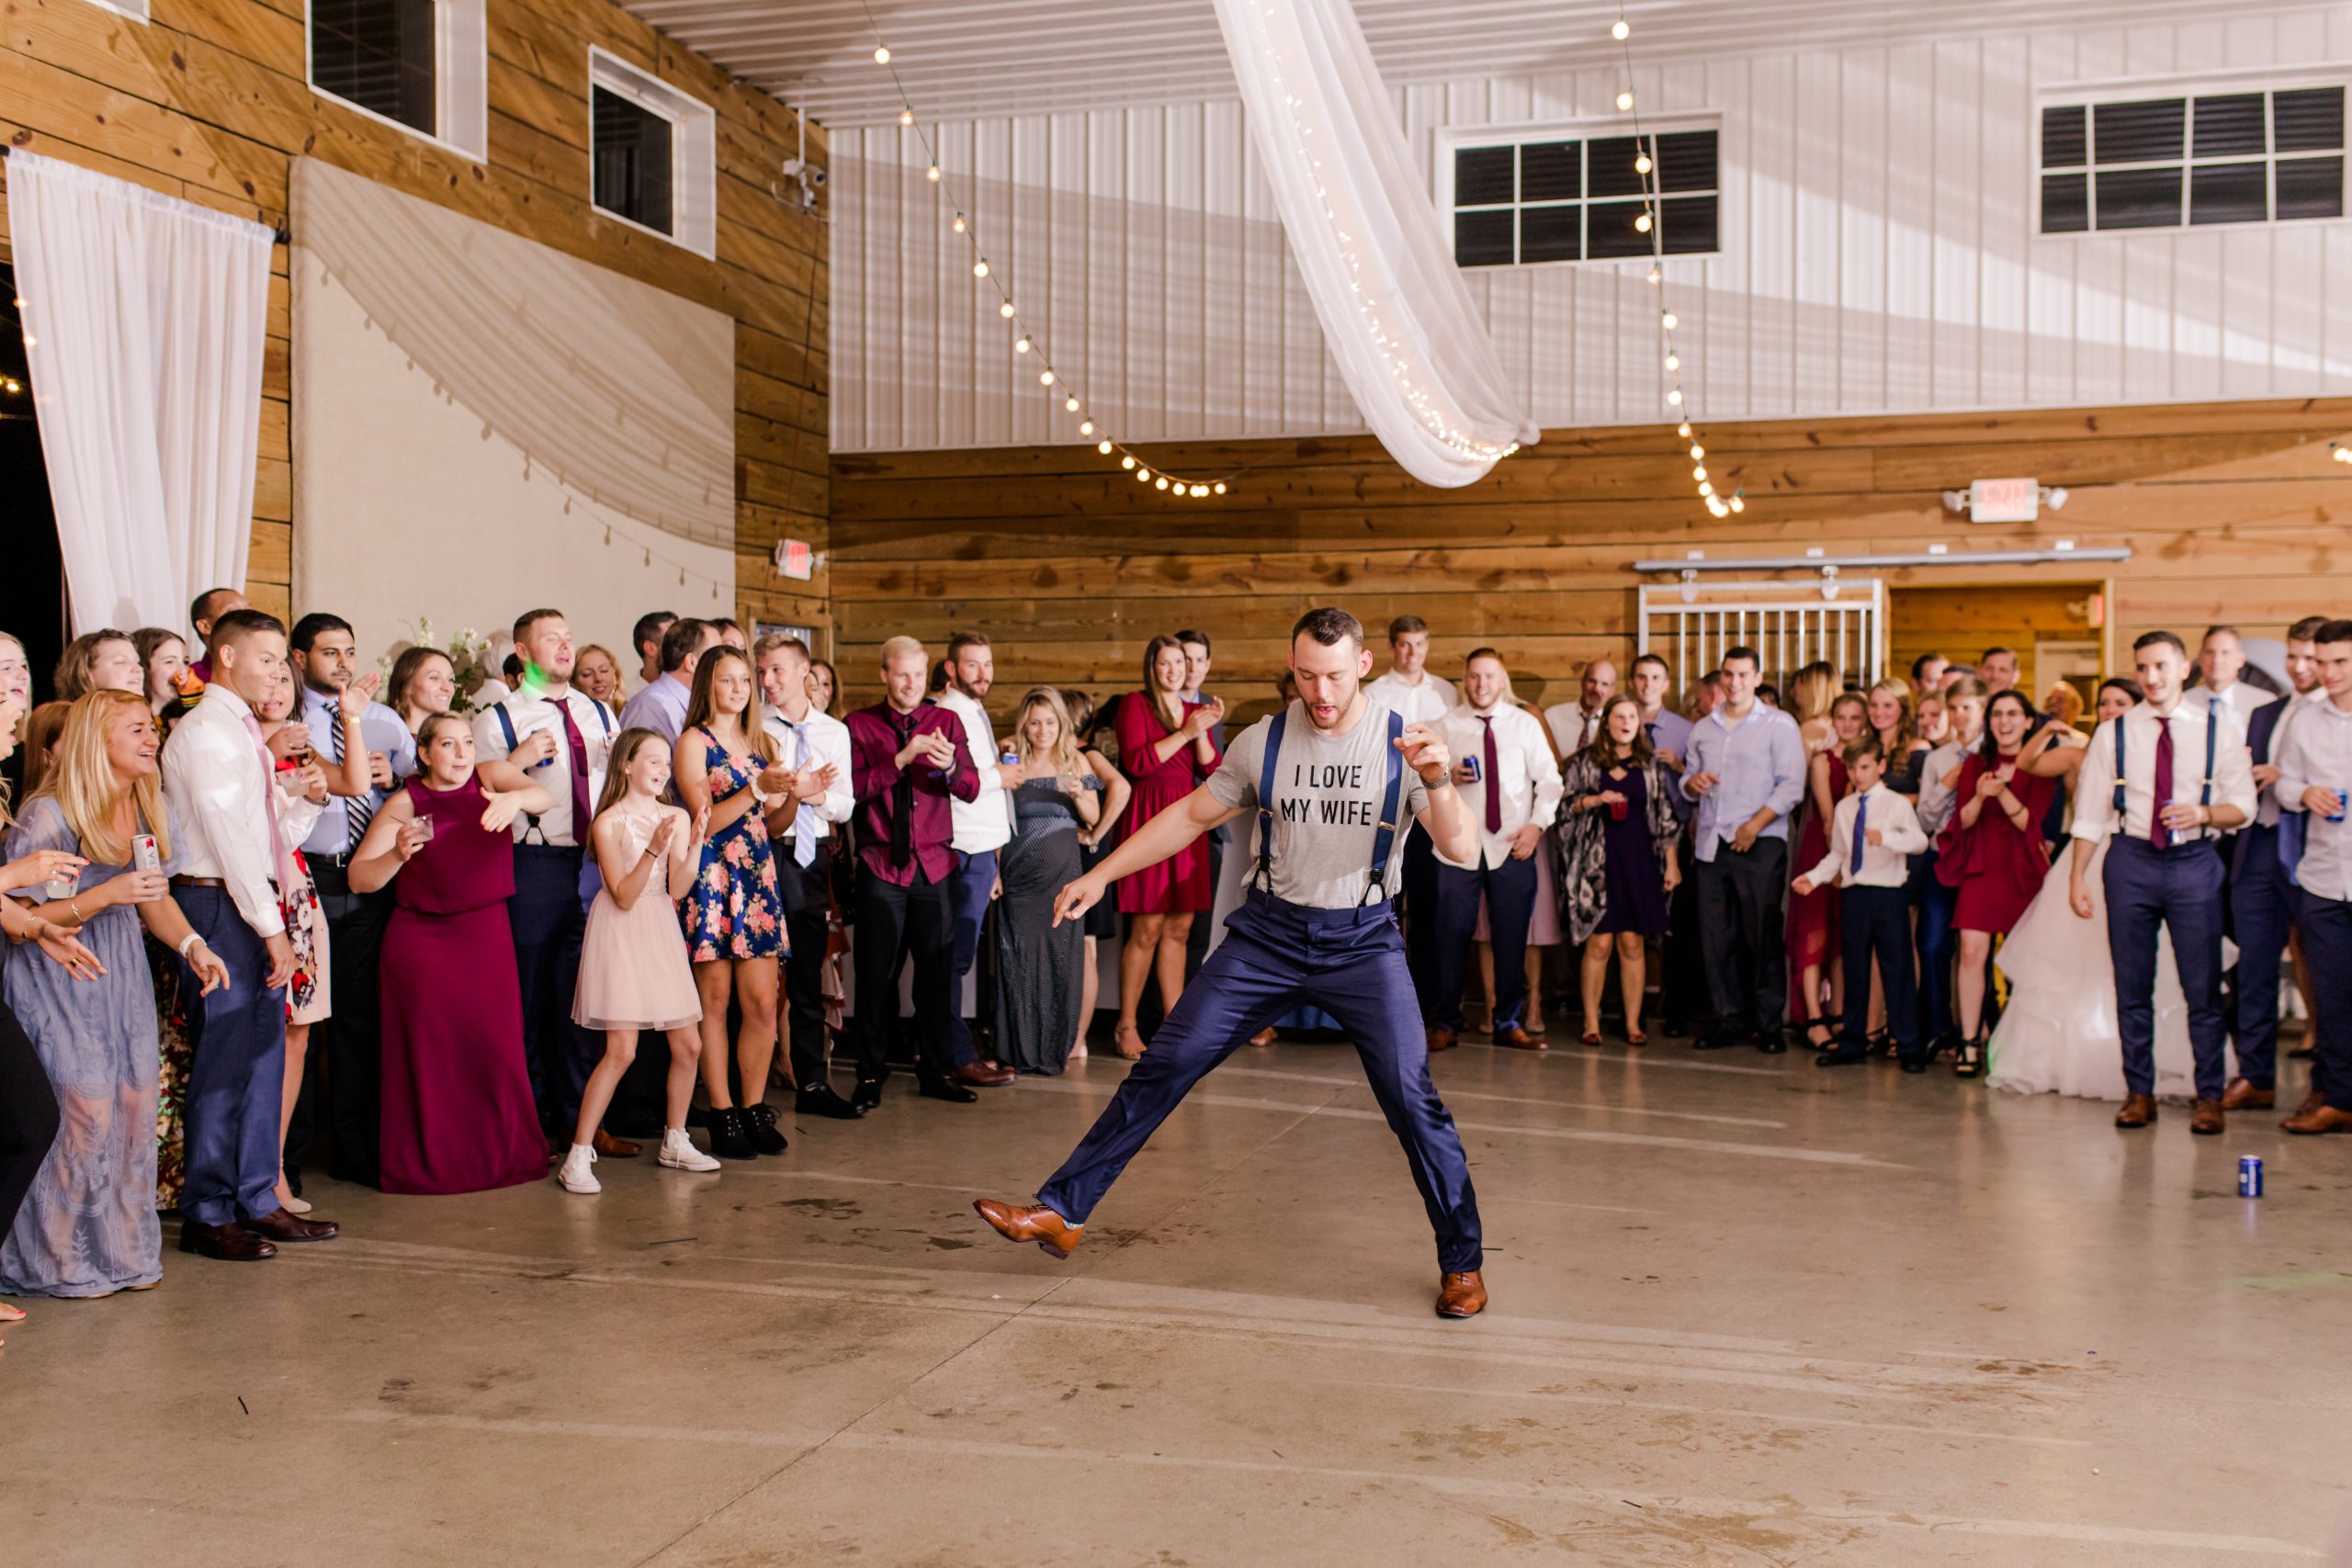 Groom dancing at The Stables on Obee with "I Love My Wife" shirt and suspenders on